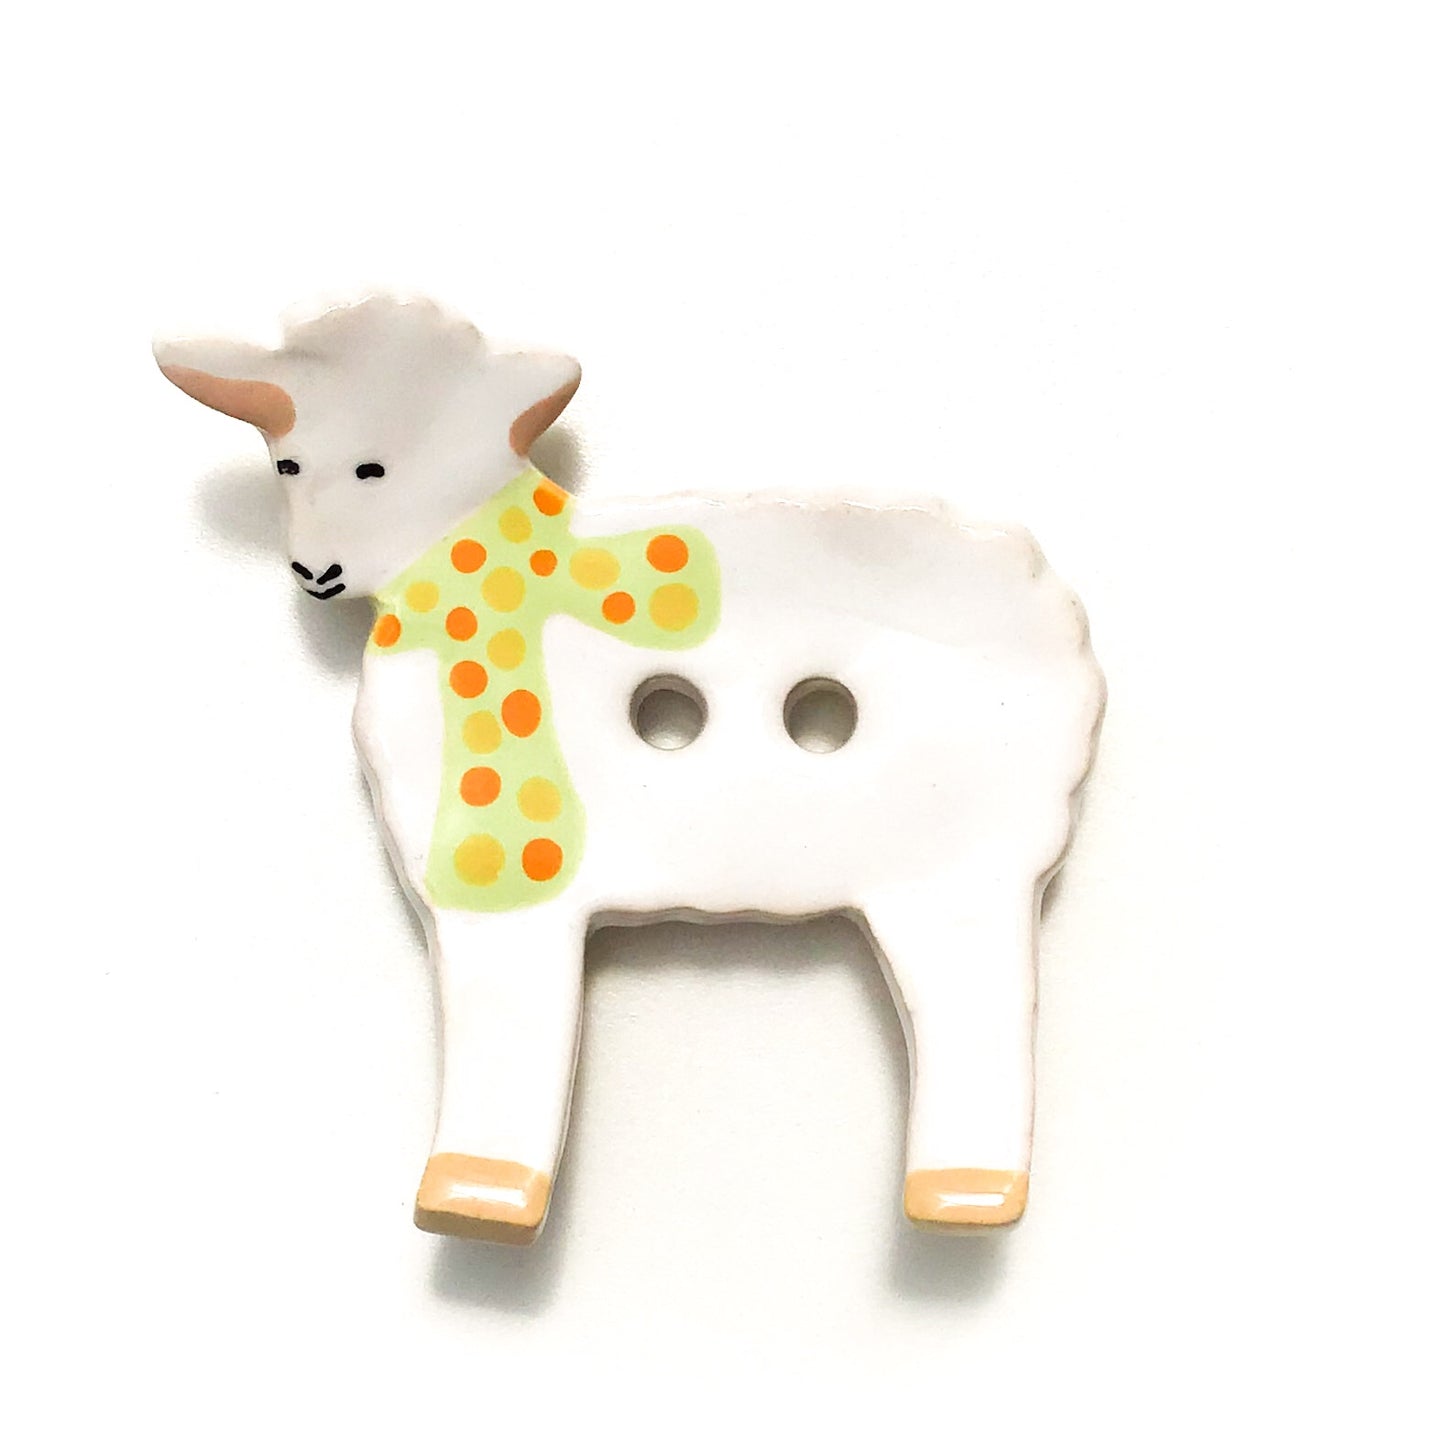 Sheep with Scarves Ceramic Soap Dish - Pottery Soap Dish - 3 1/2" x 3 3/4"